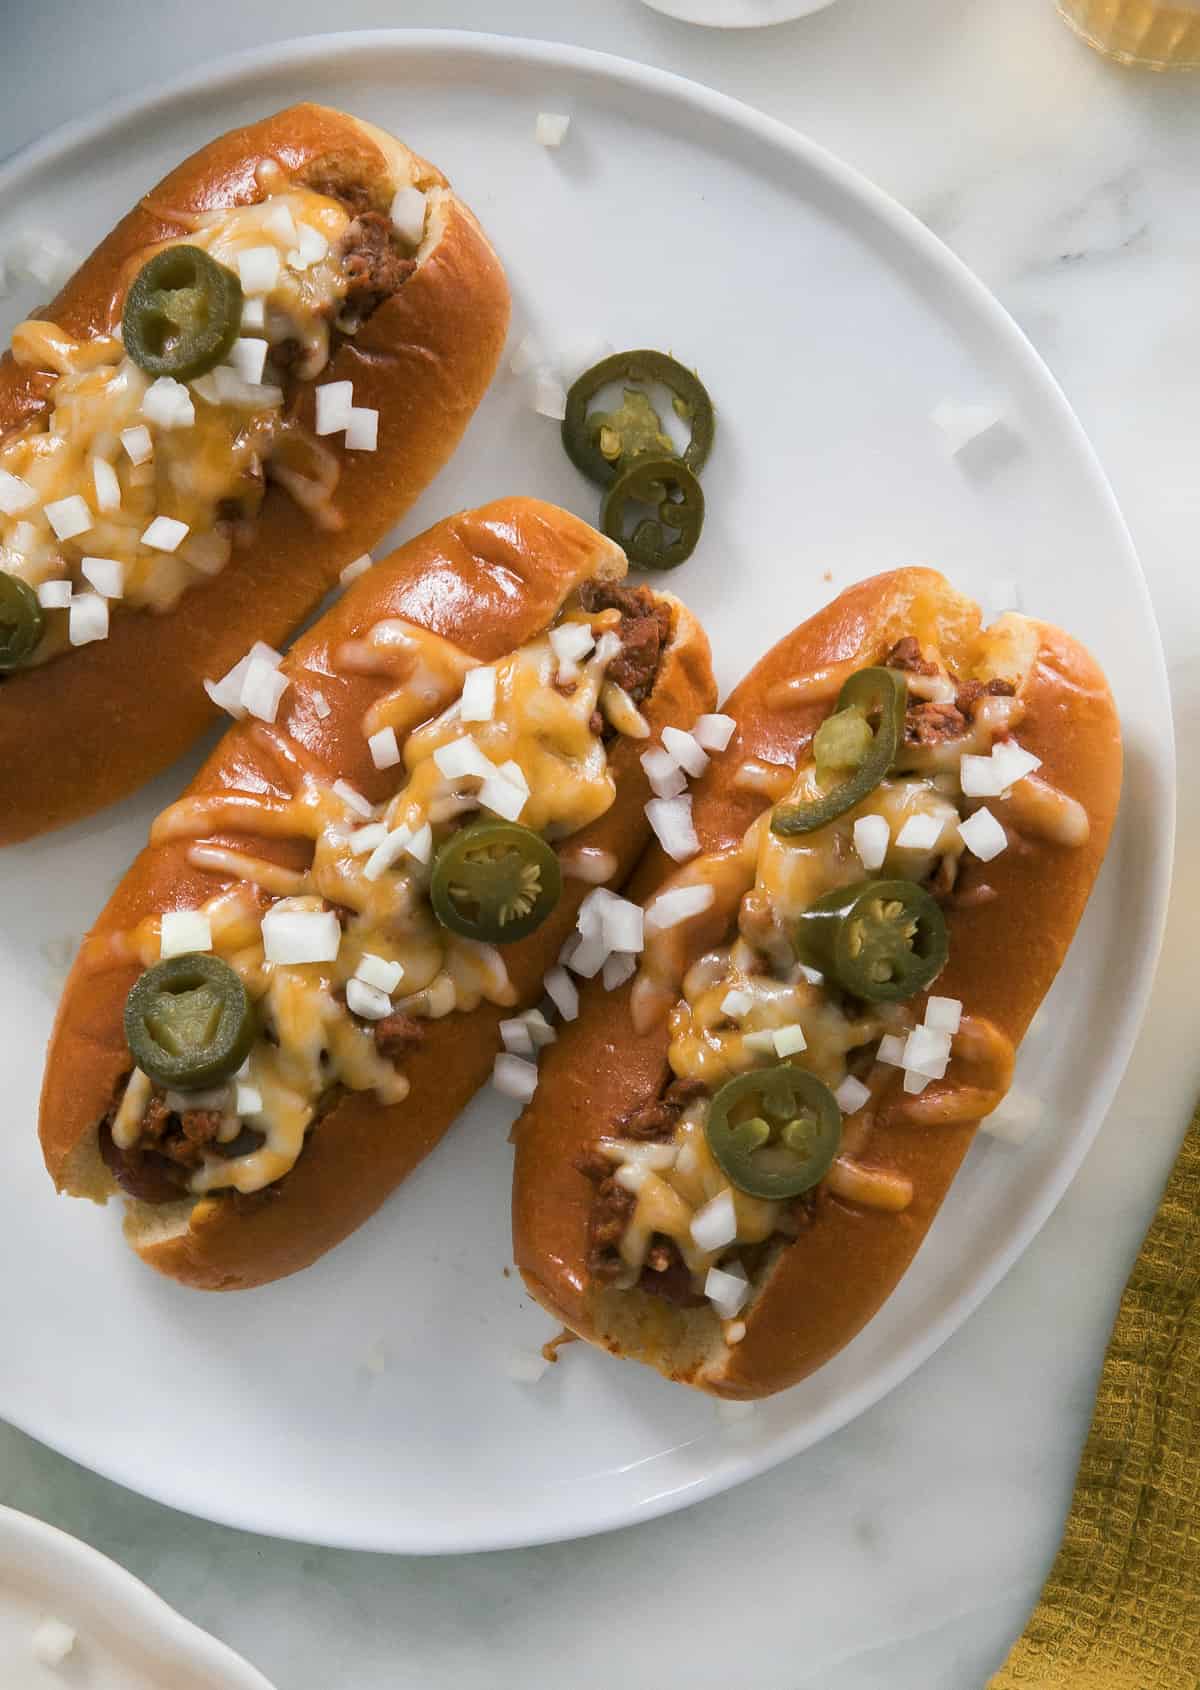 Chili Cheese Dogs With Homemade Chili A Cozy Kitchen